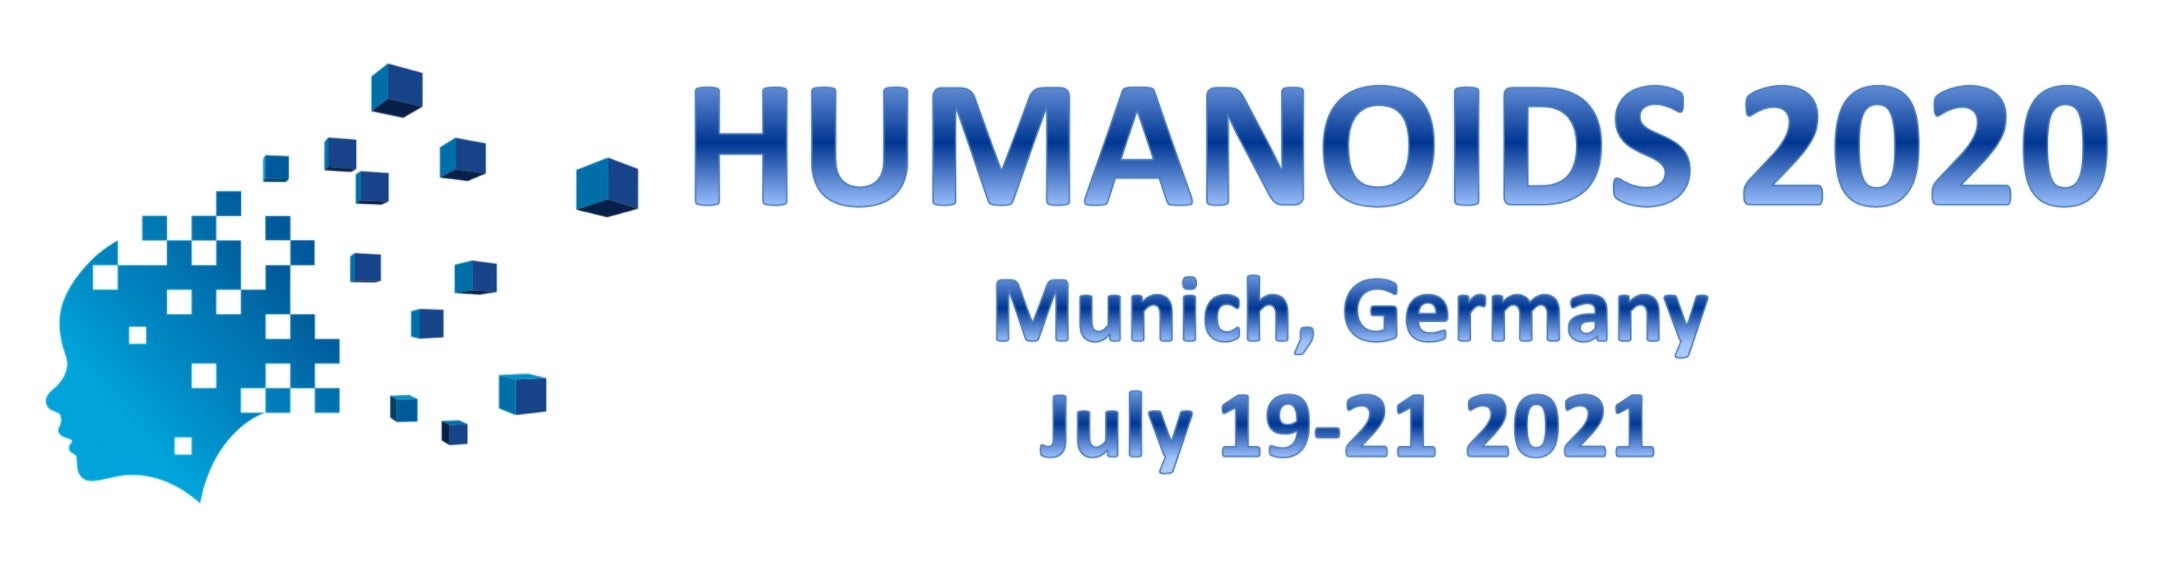 Humanoids 2020 event banner image